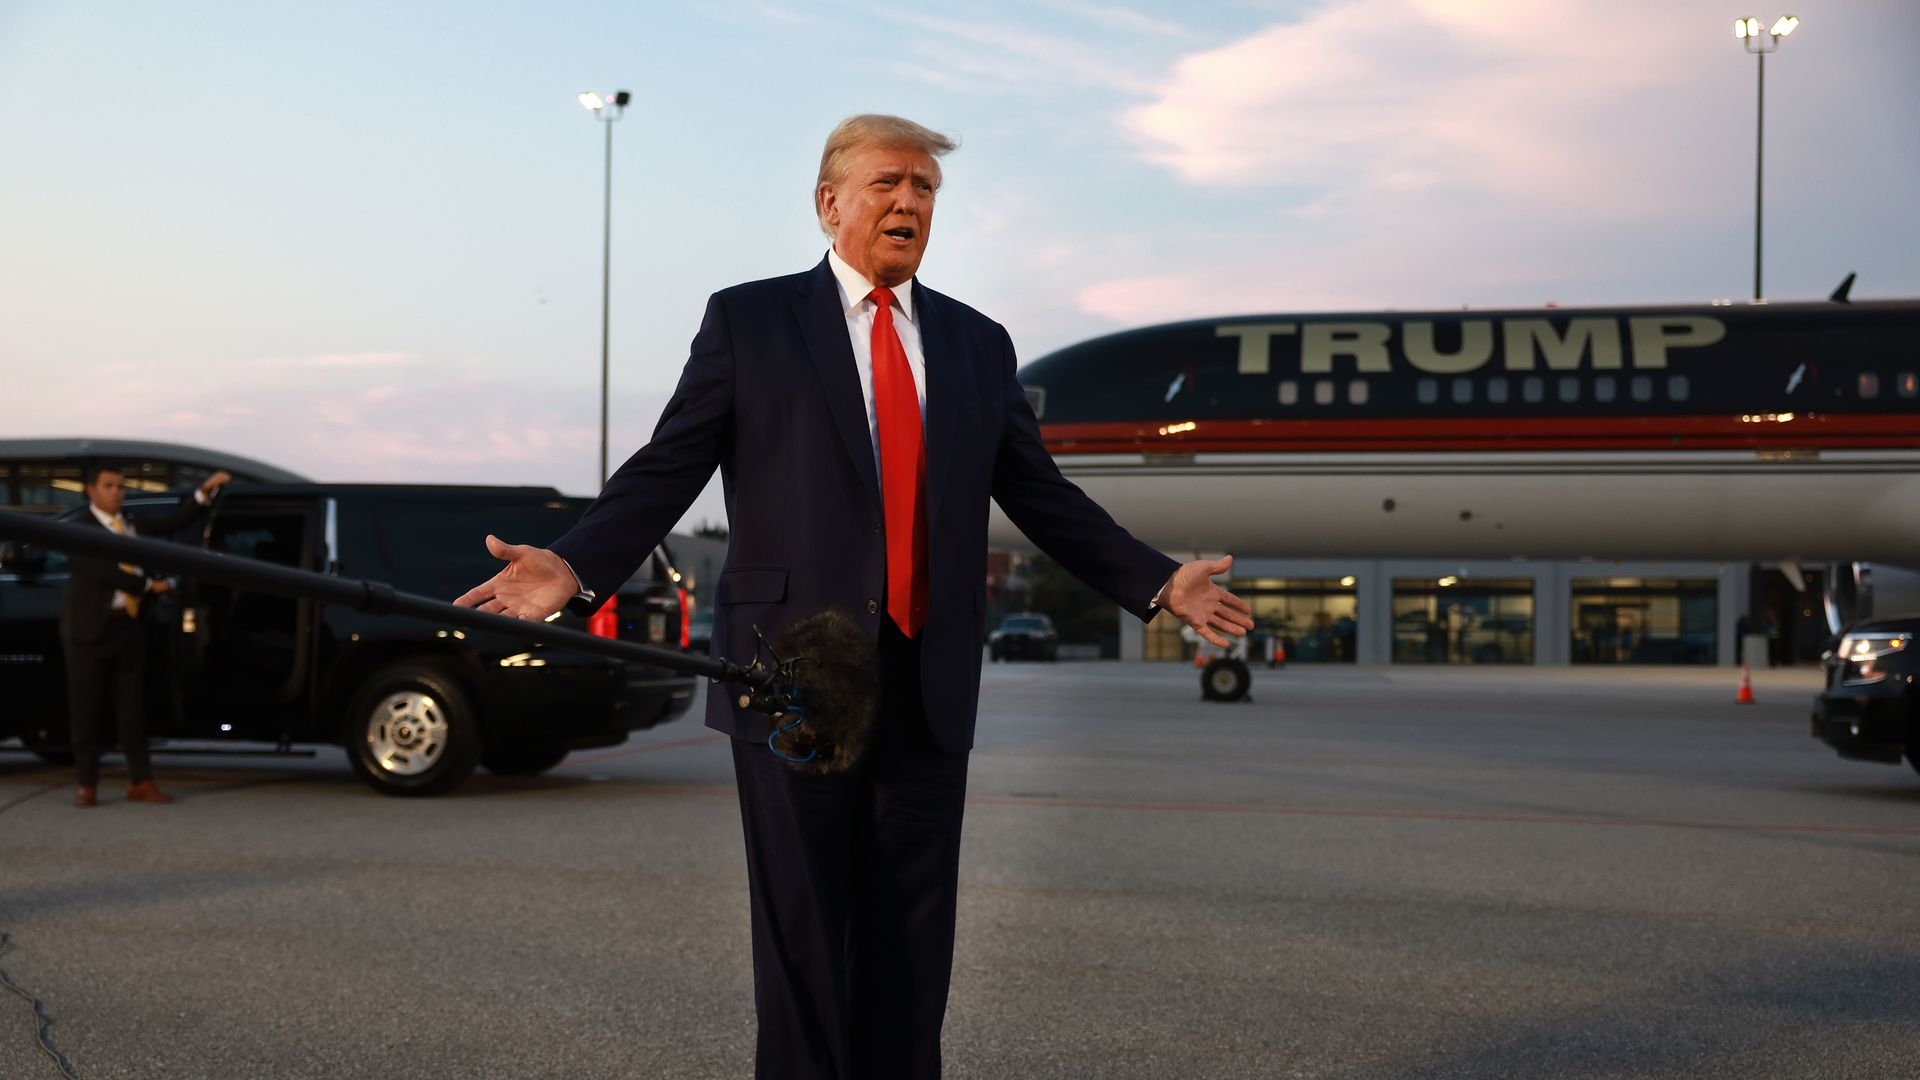 Former U.S. President Donald Trump speaks to the media at Atlanta Hartsfield-Jackson International Airport after being booked at the Fulton County jail on August 24, 2023 in Atlanta, Georgia